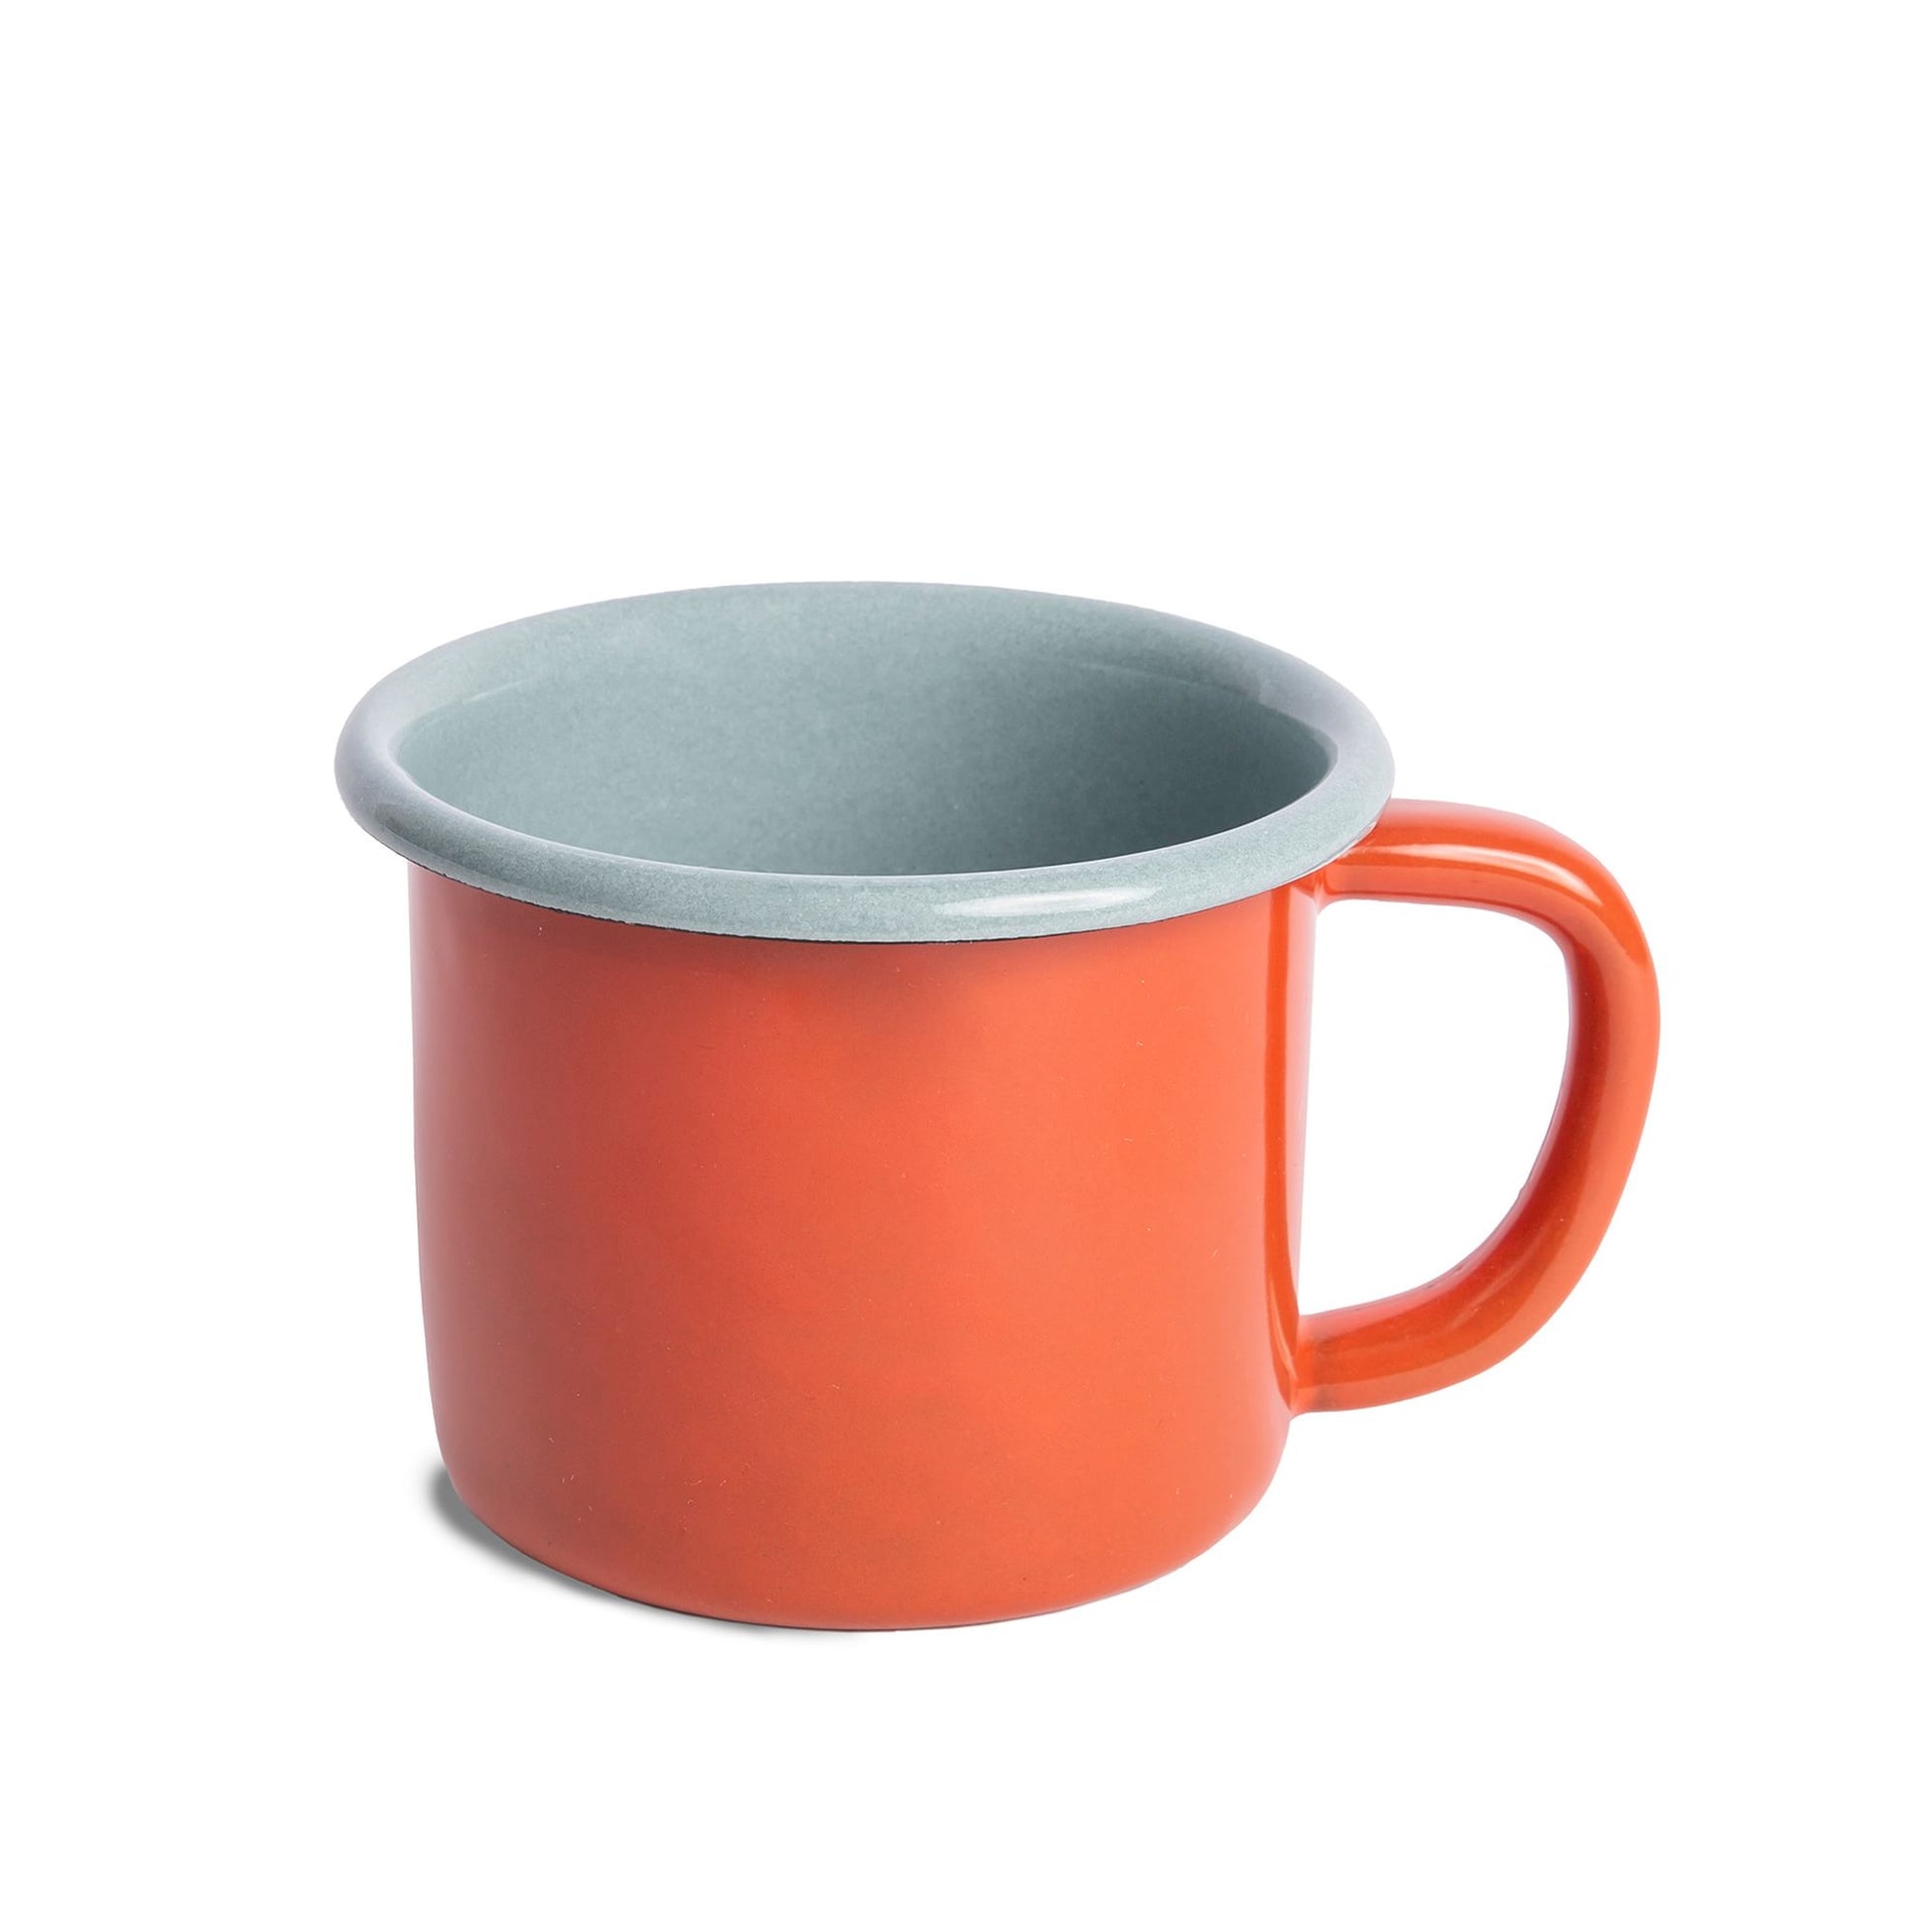 enamel mug that is red on the exterior and light blue on th einterior.